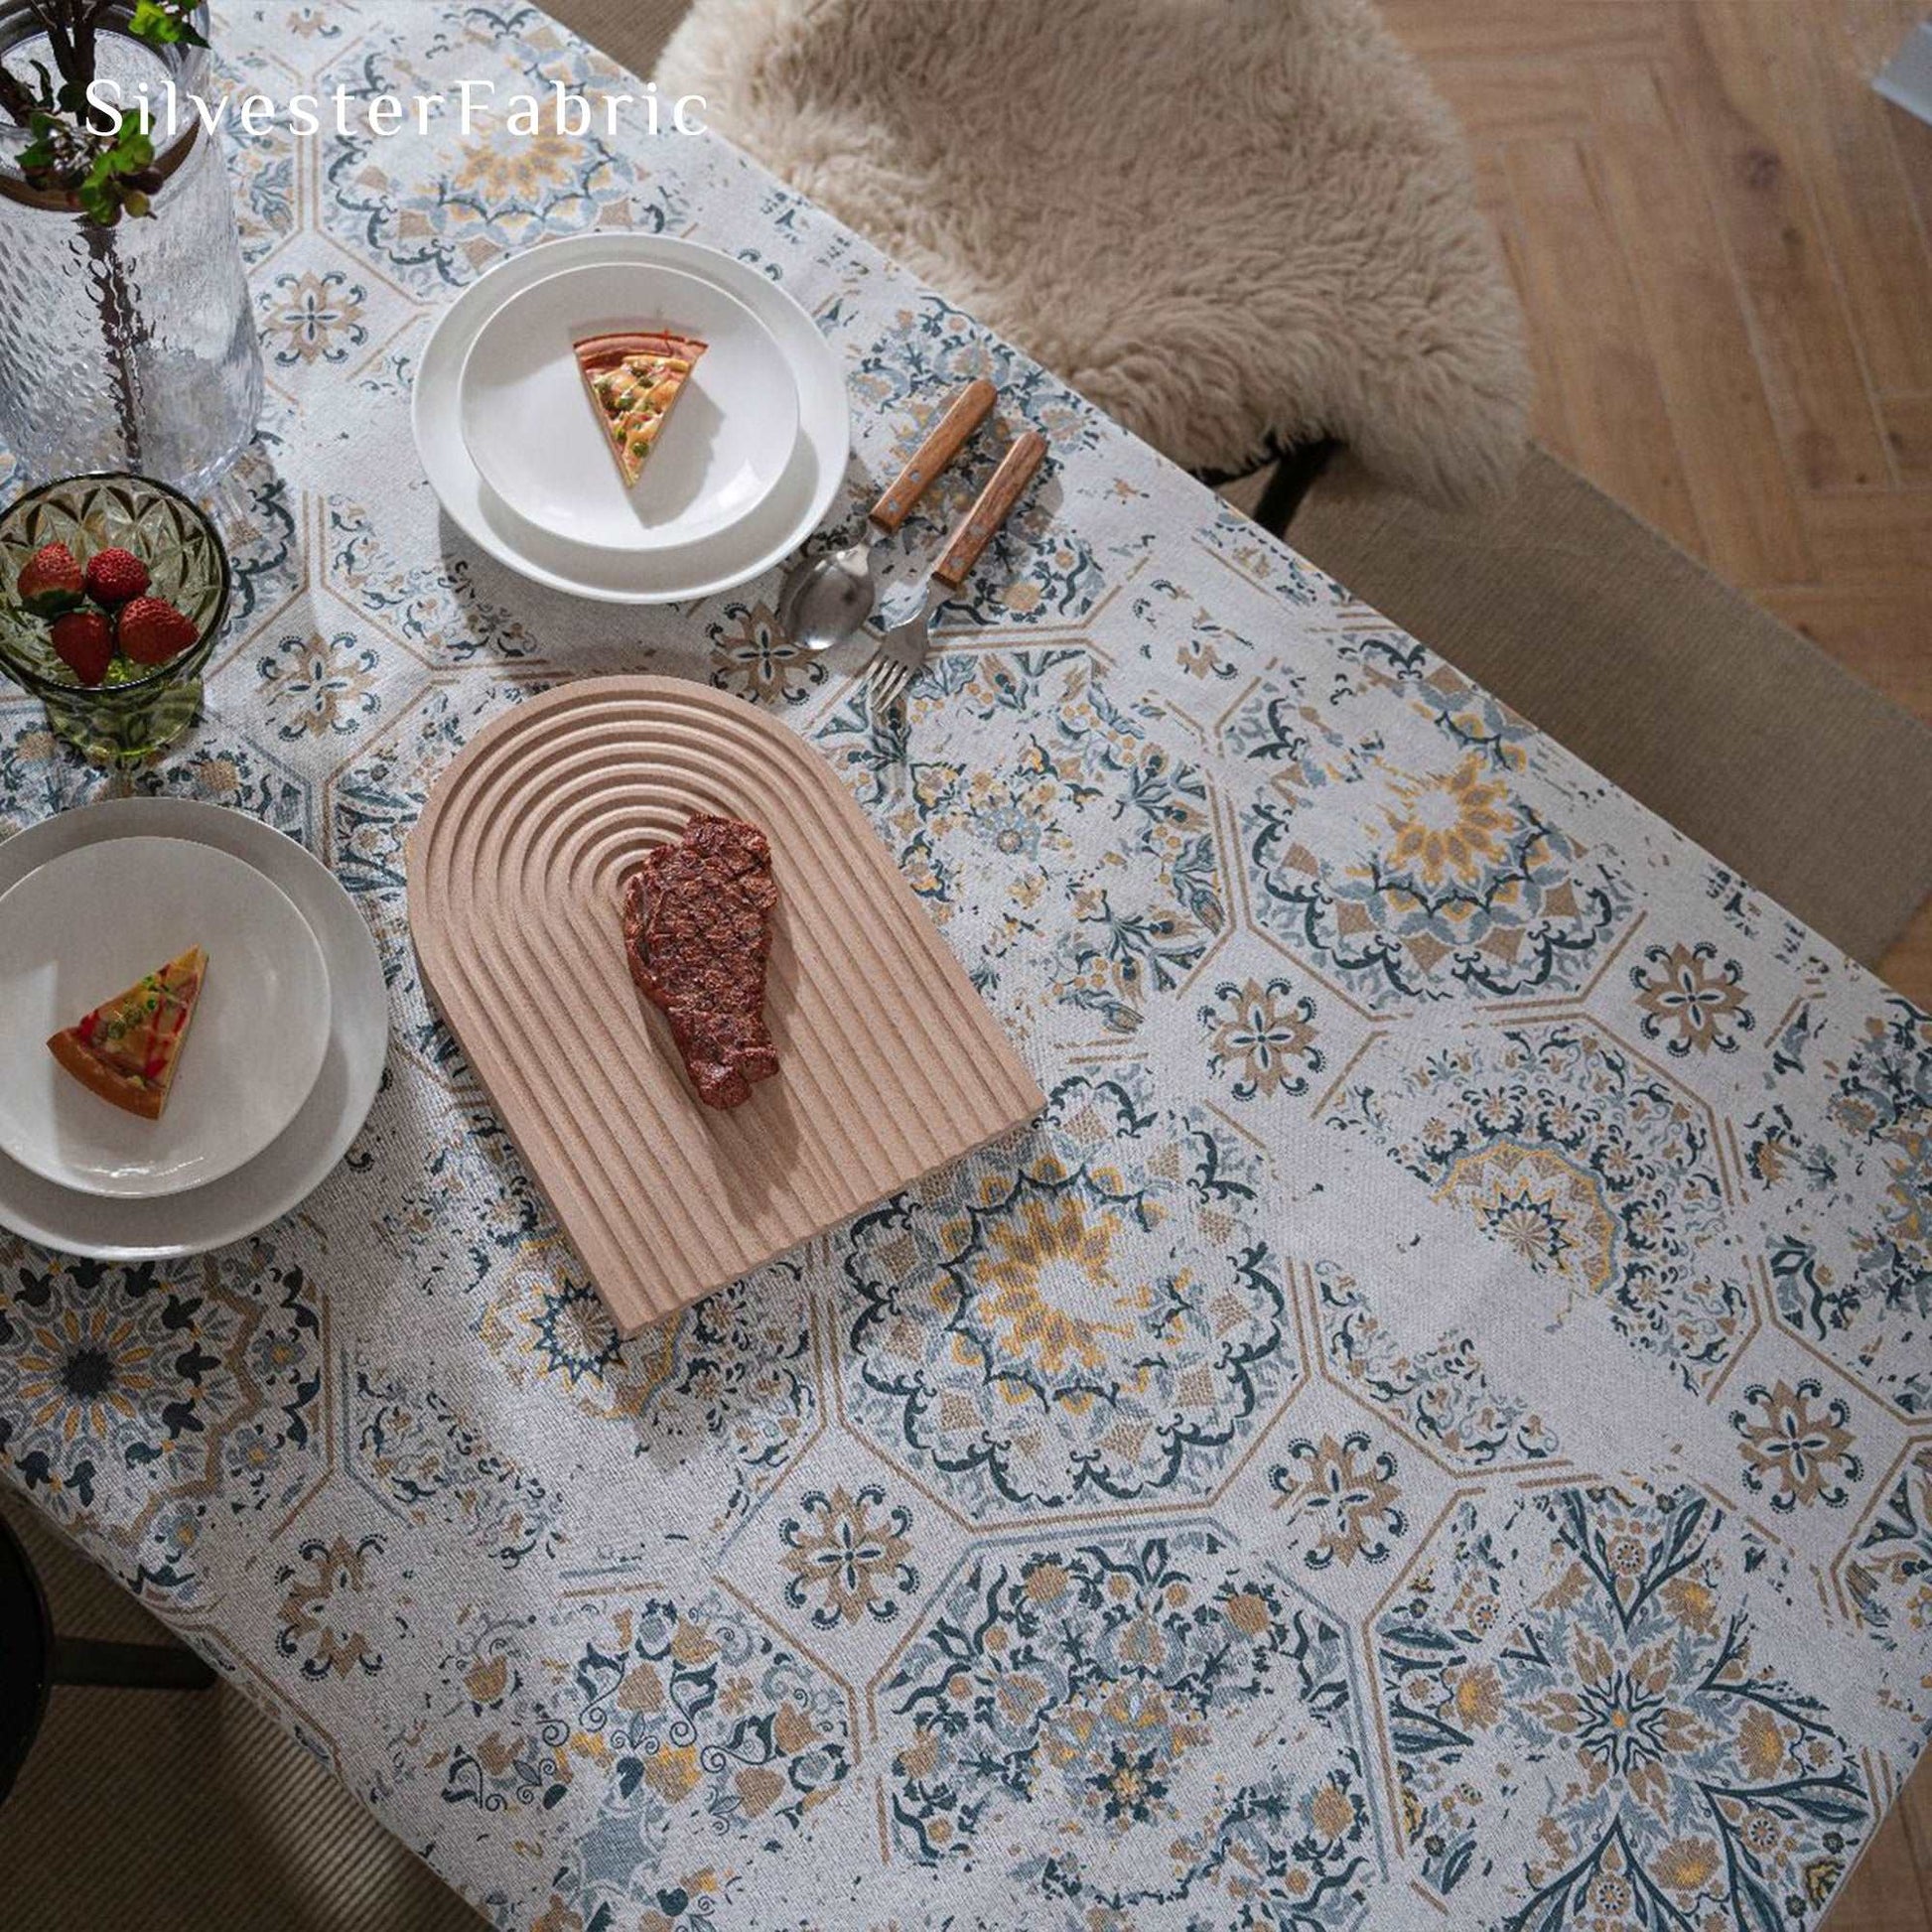 Spring Vintage Geometric Textured Floral Print French Linen Tablecloths